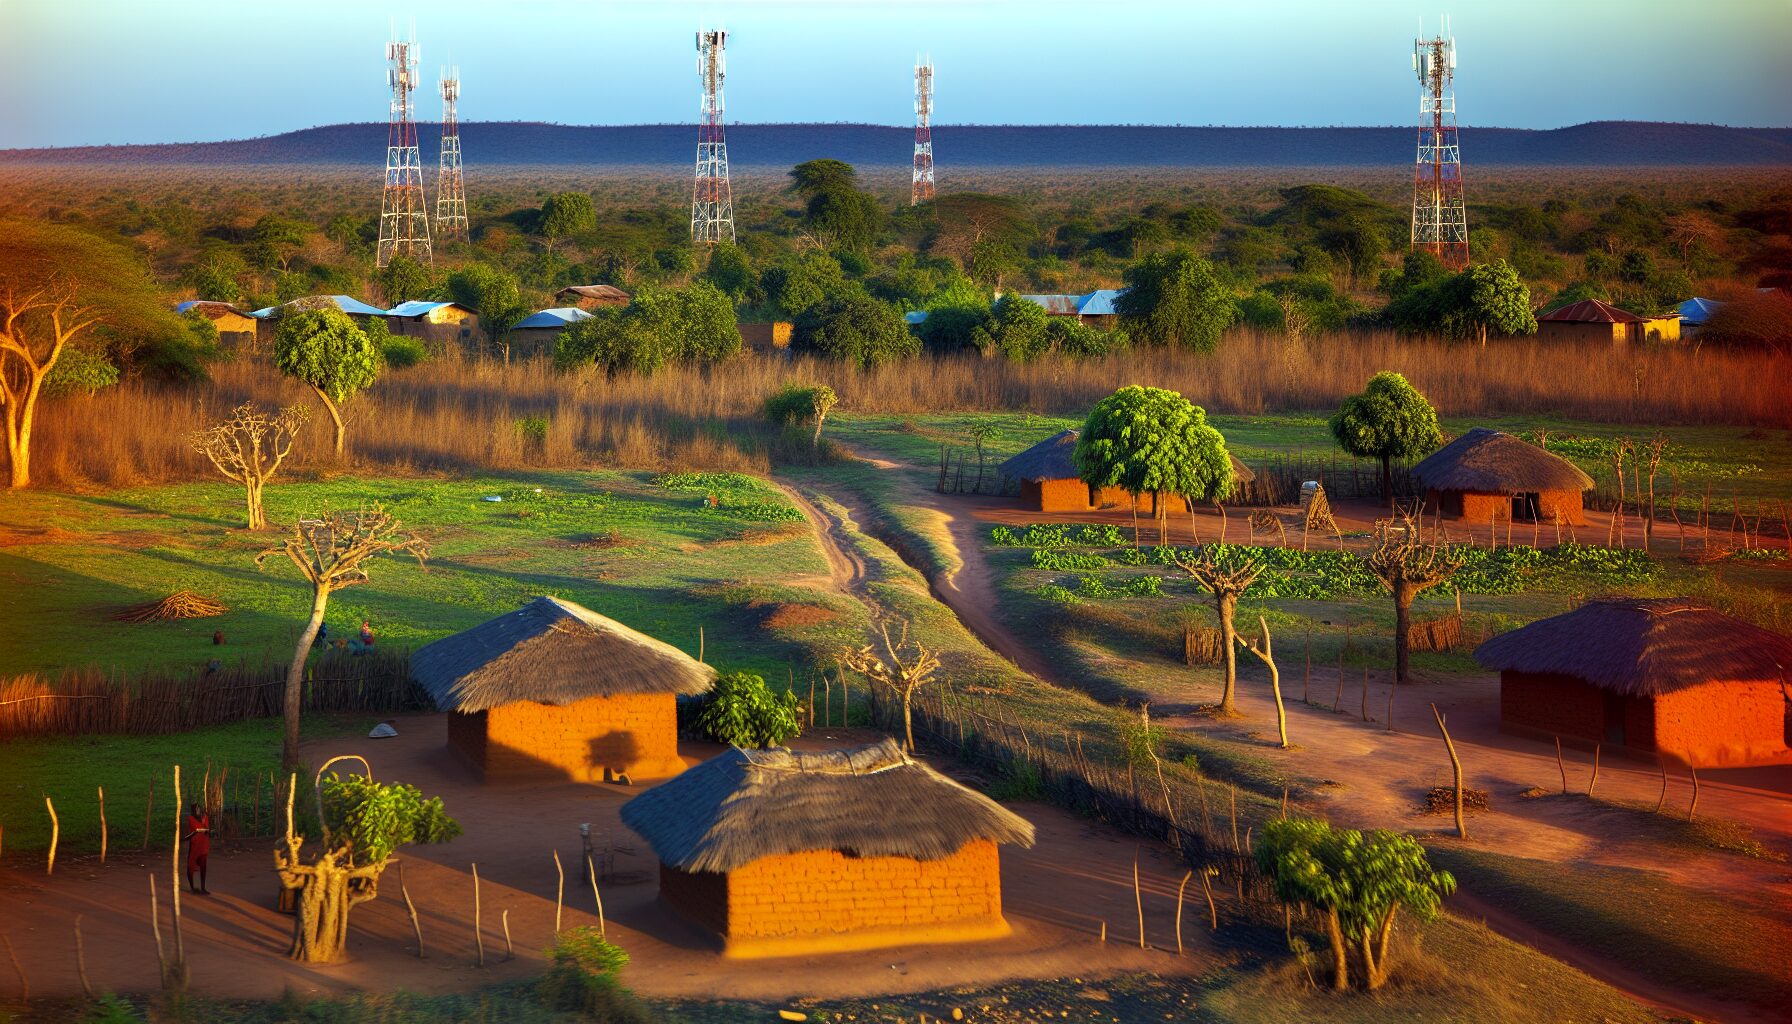 A rural area in Tanzania with newly erected communication towers for improved connectivity